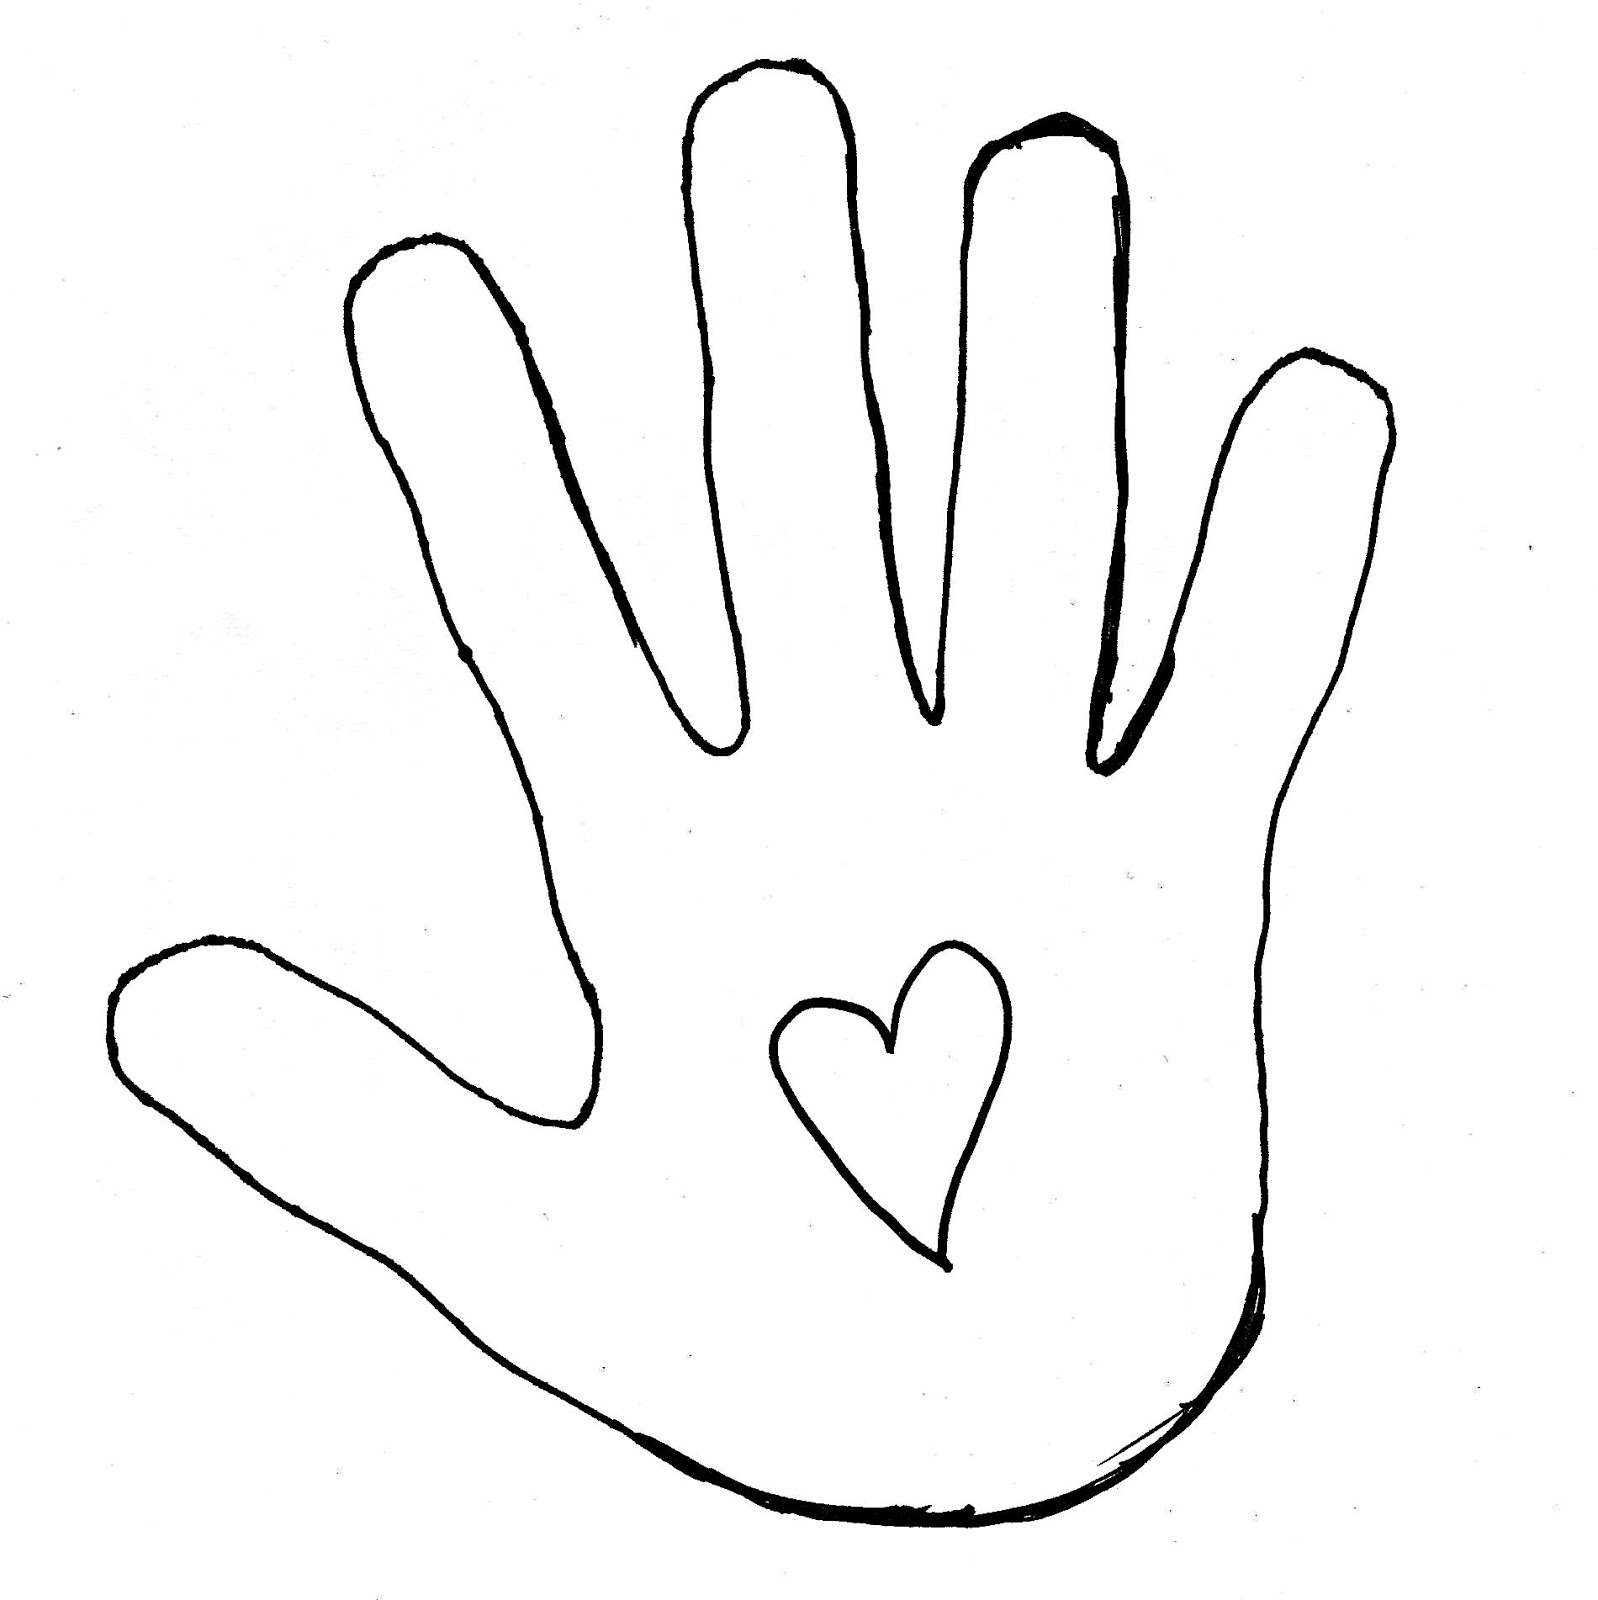 Handprint Template Printable Adding a Personal Touch to Your DIY Projects